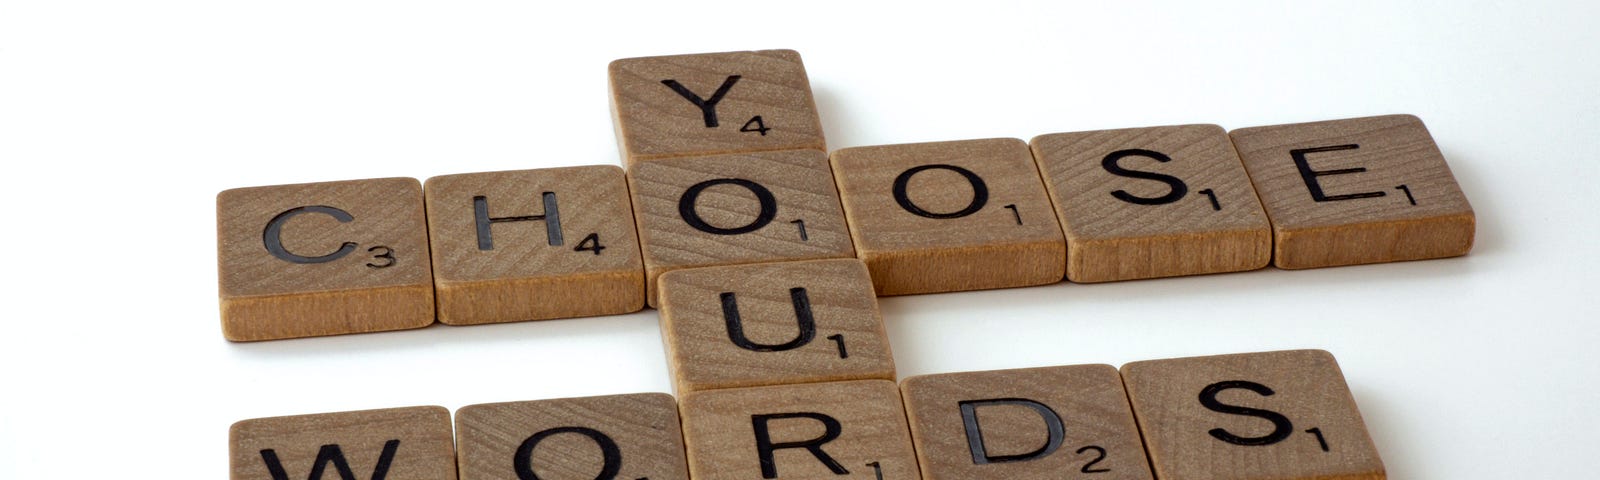 Scrabble tiles spell out Choose Your Words